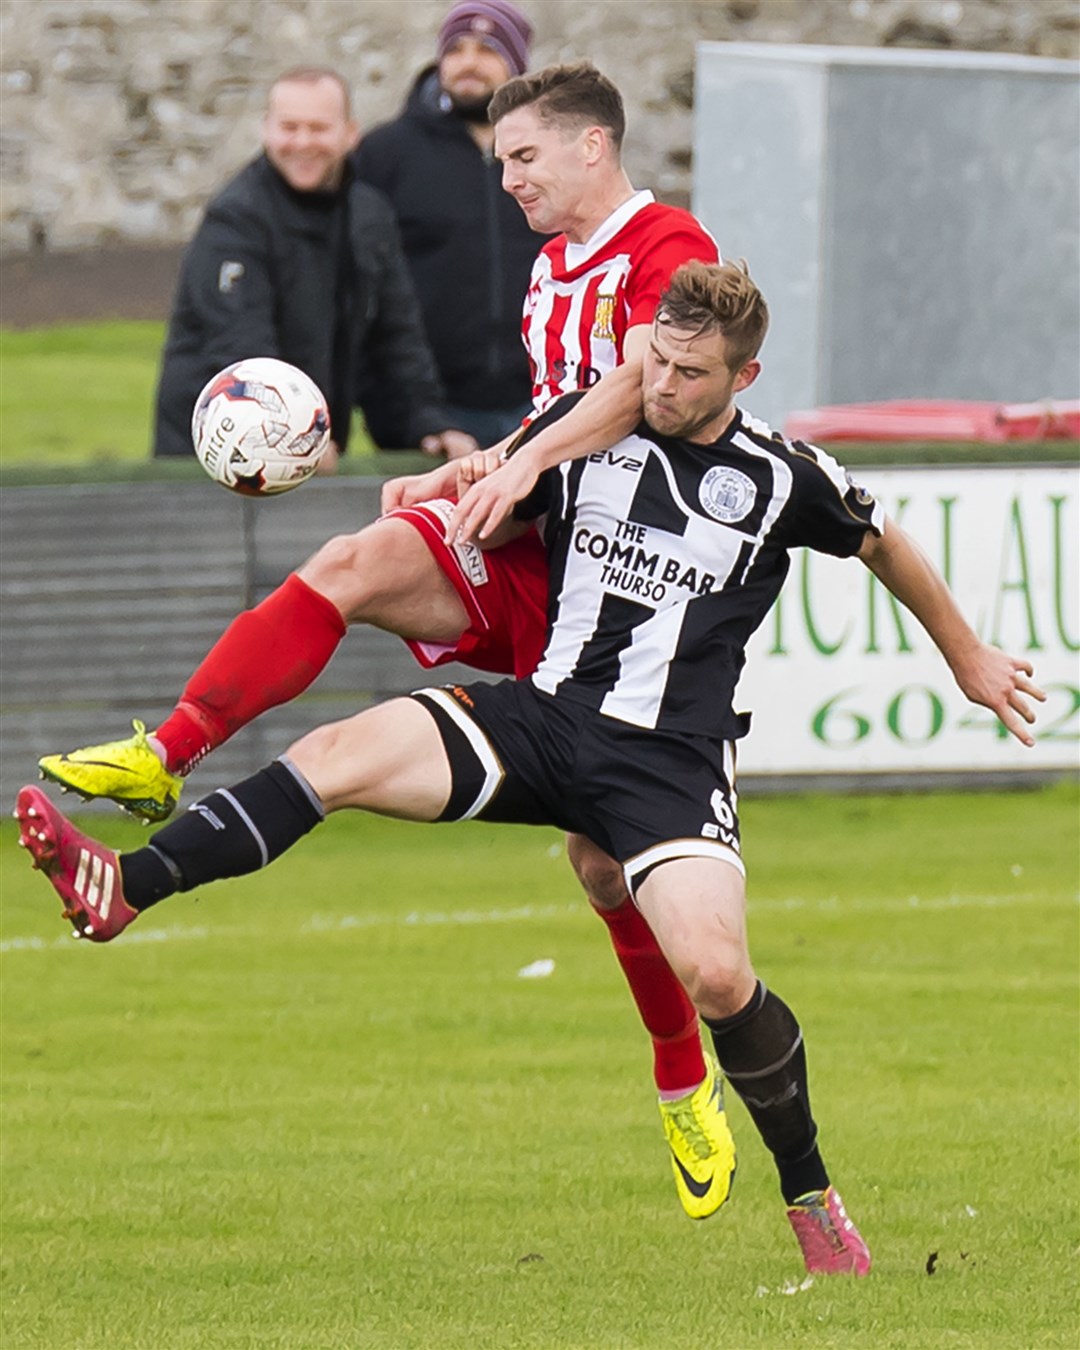 Gordon McNab in action for Wick, now back at Forres Mechanics for a second spell and will face his old team on Saturday.